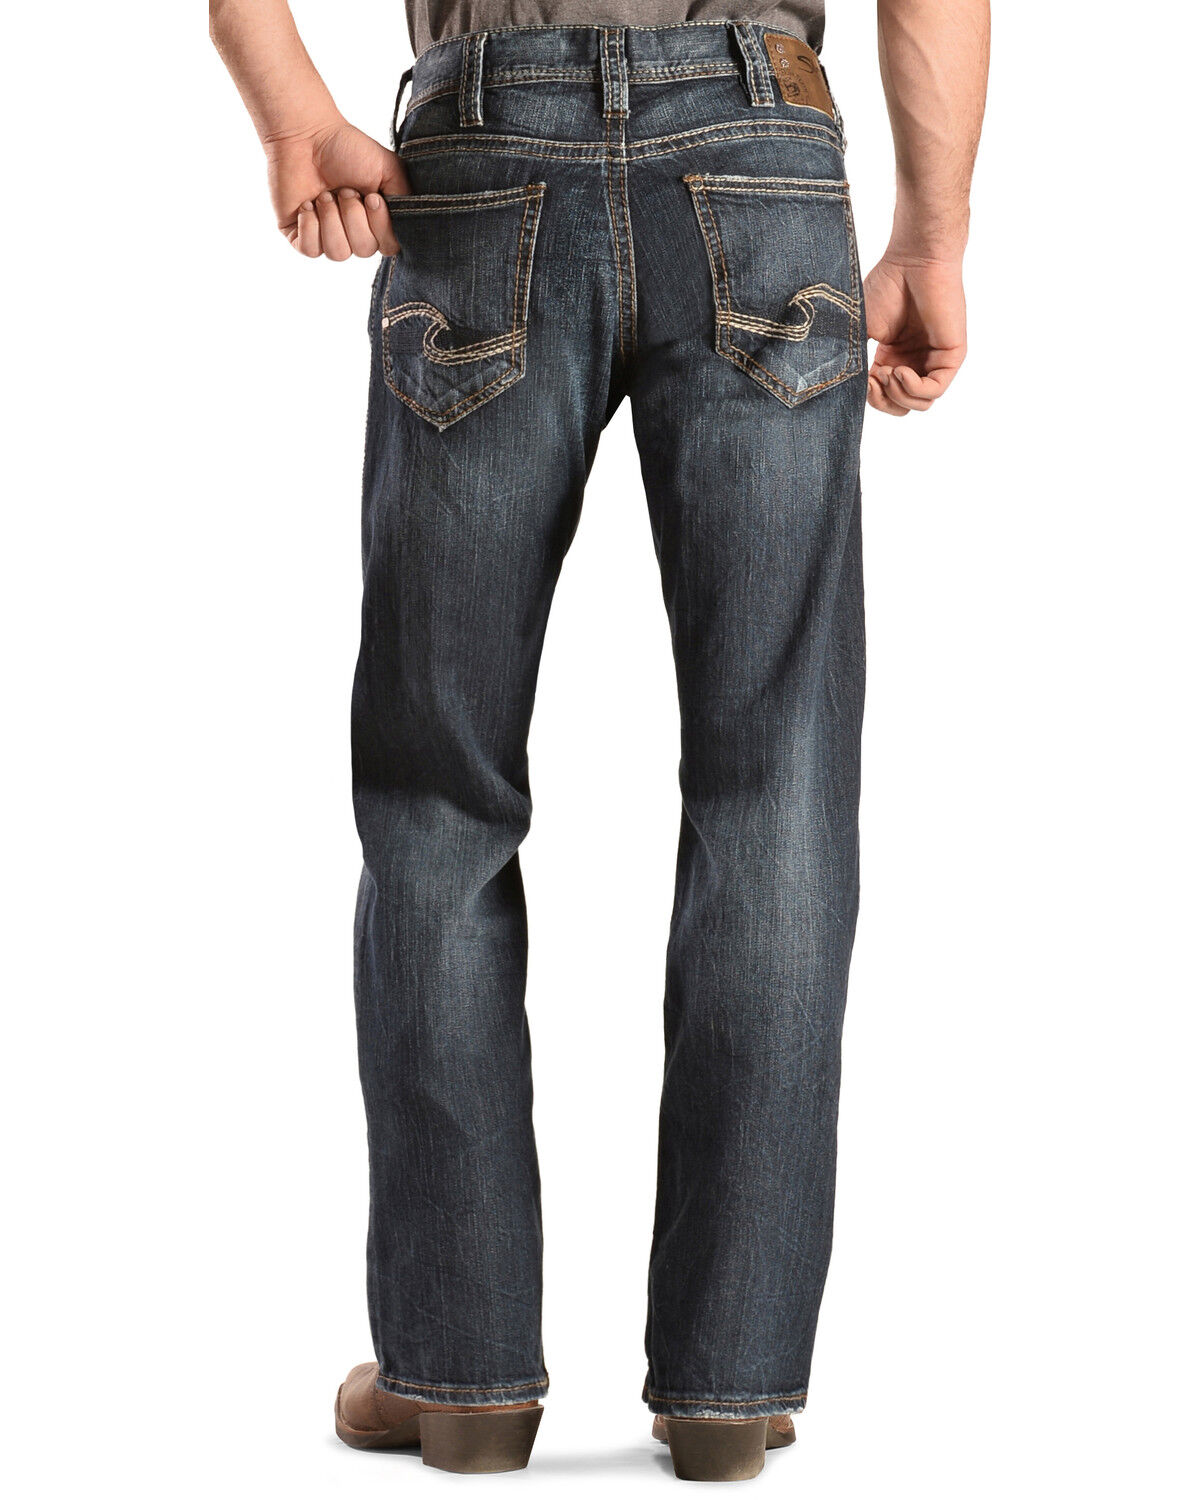 silver mens jeans